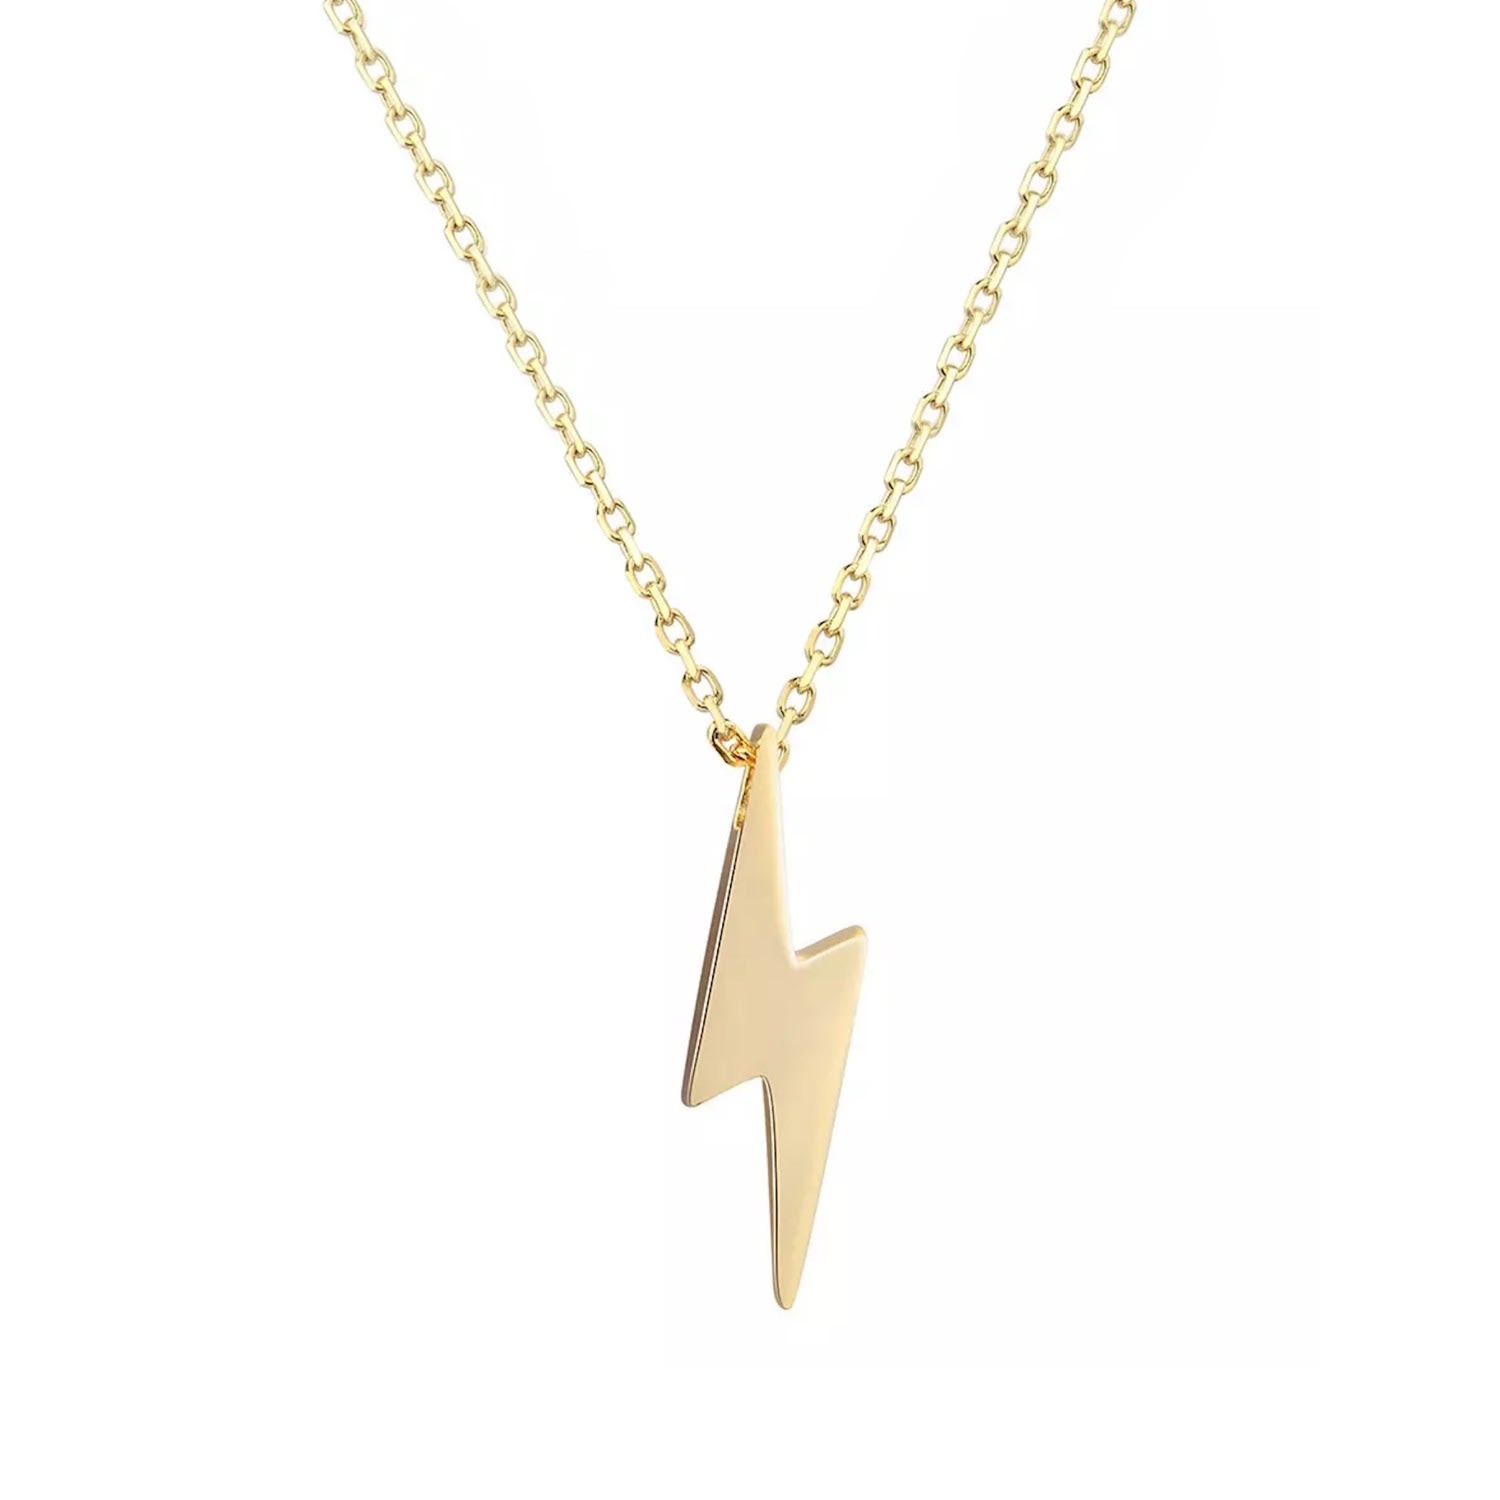 Women's Bowie Bolt 18K Gold Plated Sterling Silver Necklace Fanclub